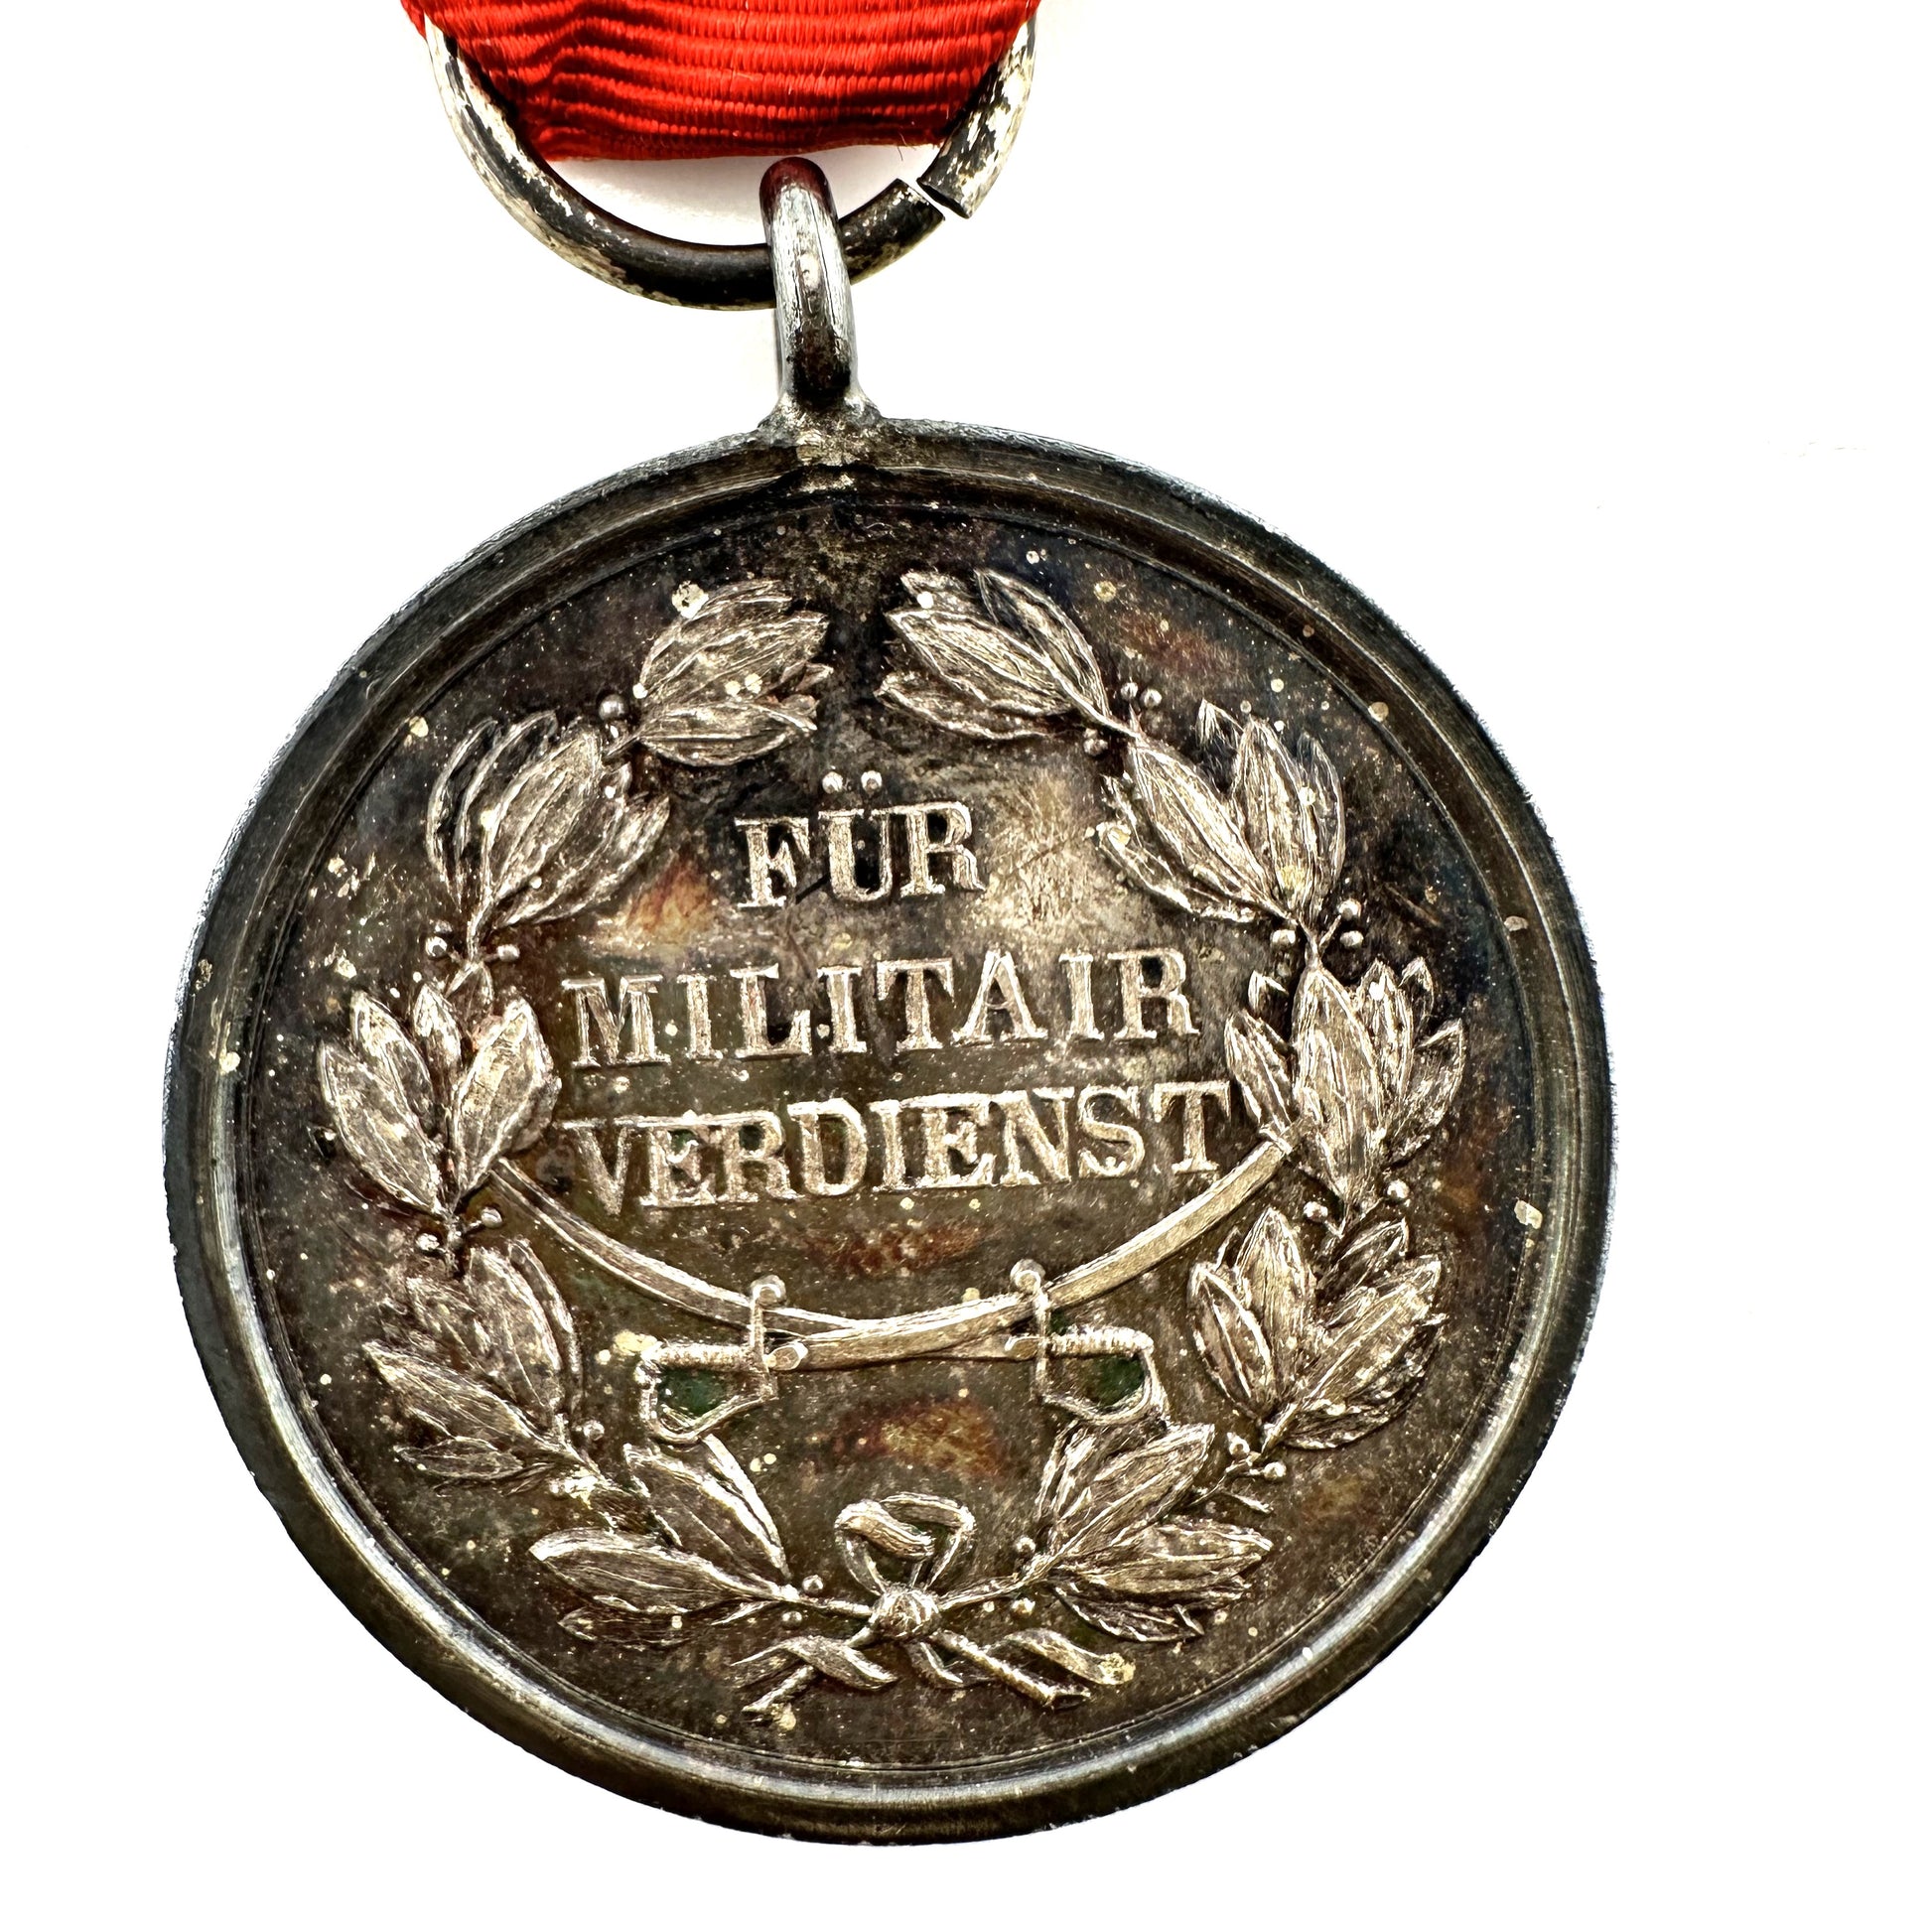 Hesse-Darmstadt Military Service Medal - Derrittmeister Militaria Group